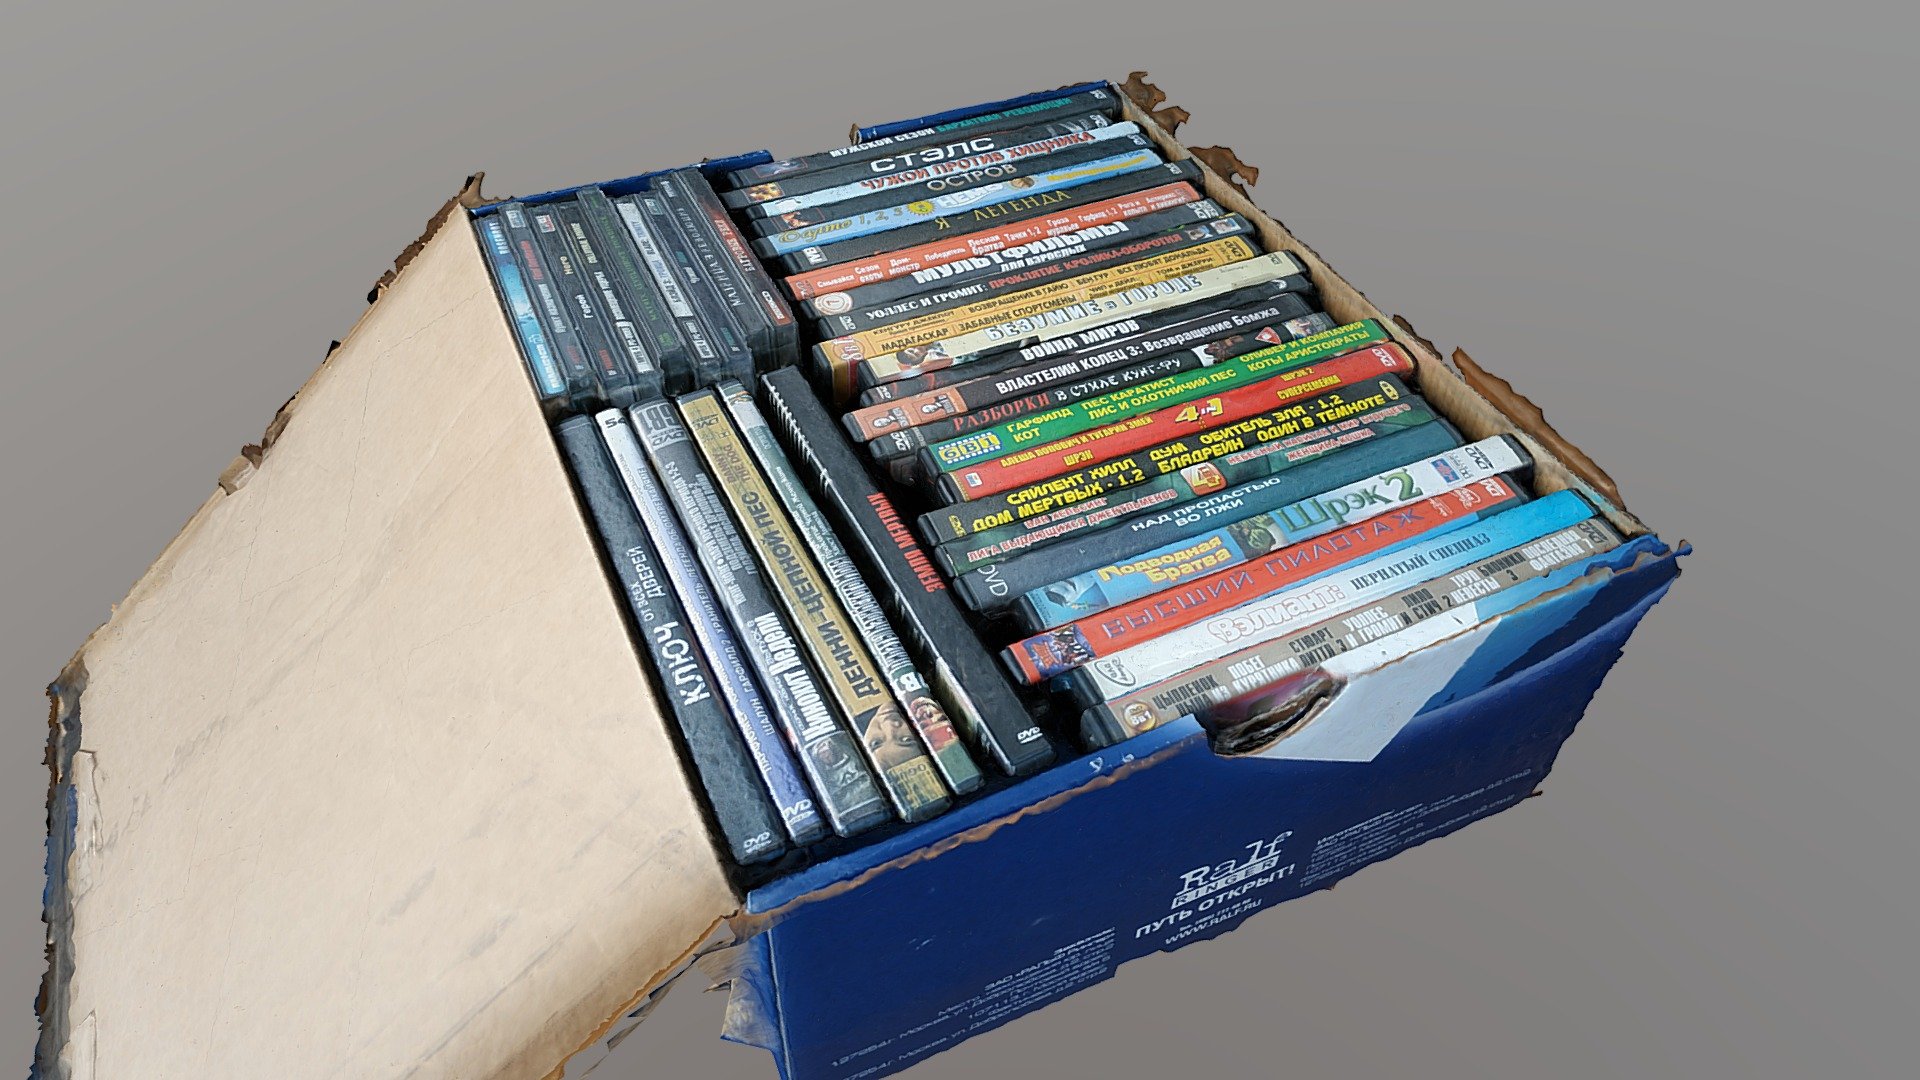 Box with dvd's